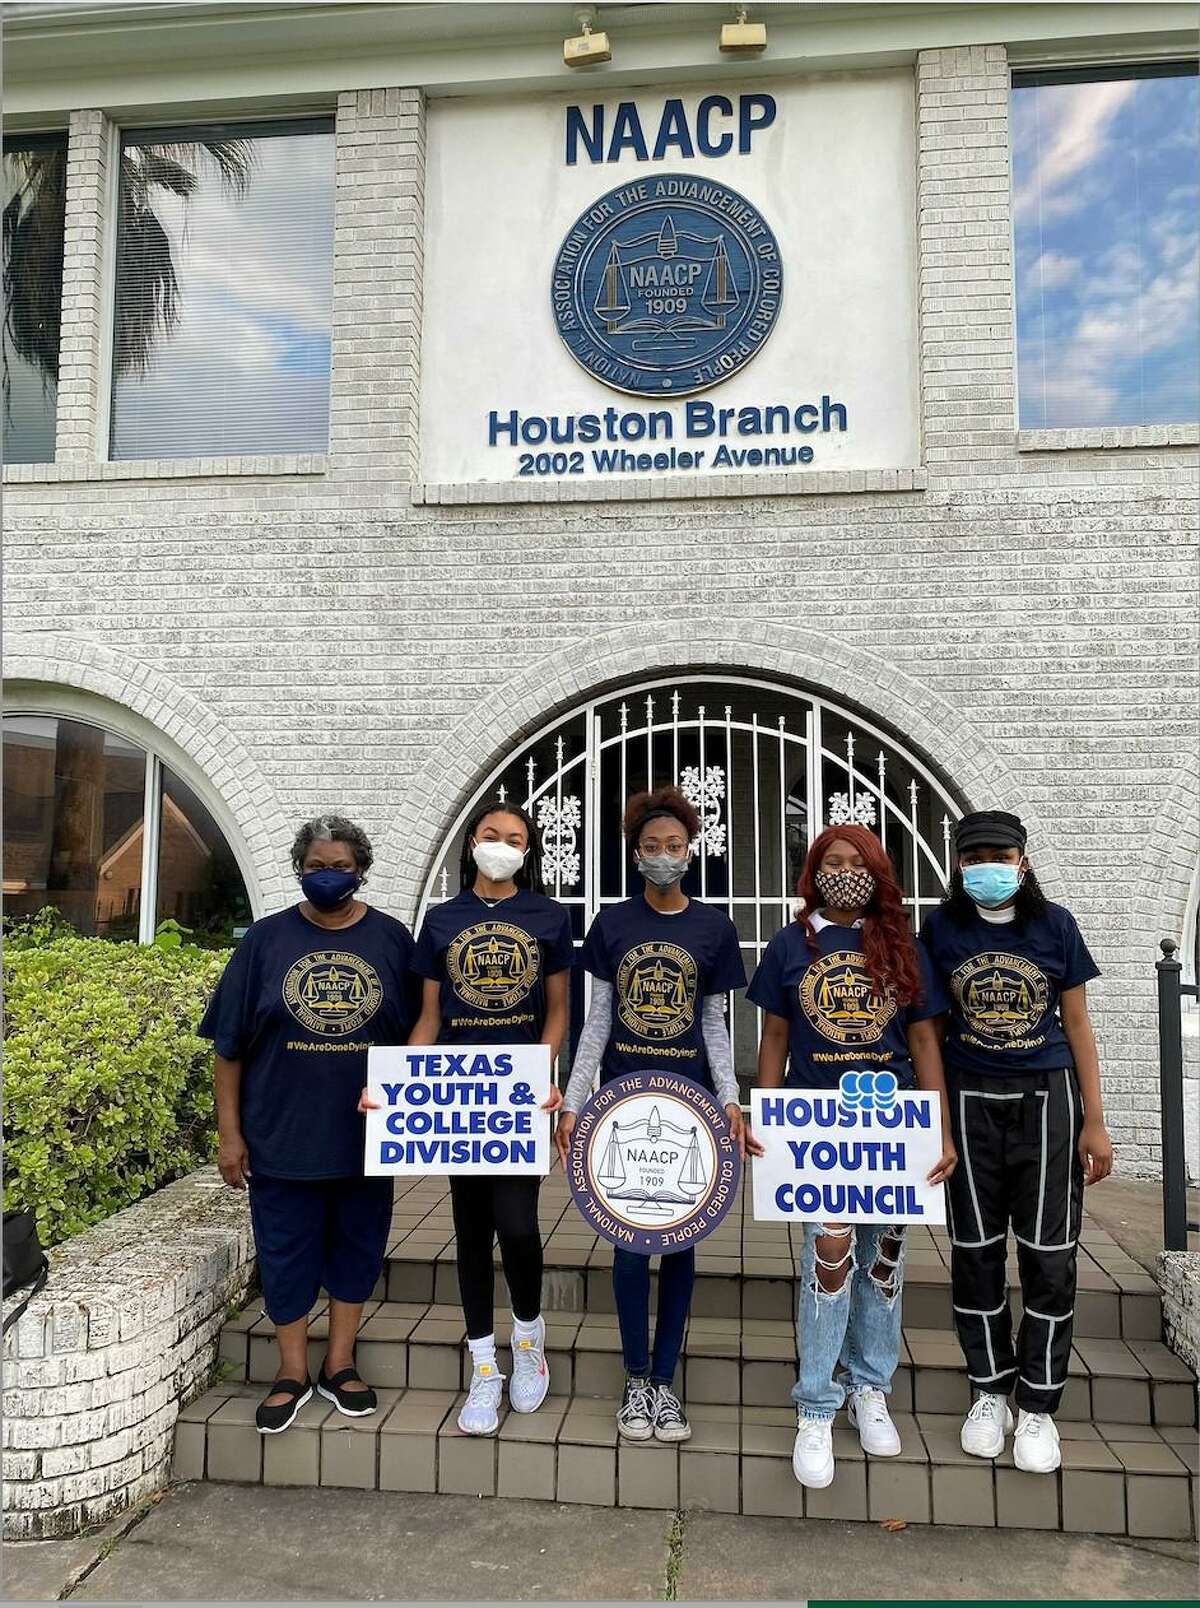 Pictured with the NAACP Houston, TX Youth Council Unit #6820, from left to right, is Avelina Holmes, Youth Council Advisor; Zoë McClendon, Juvenile Justice Committee Chair; Jahya Lucas, Secretary; Heaven Thomas, Assistant Secretary; Summer Thompson, Member.